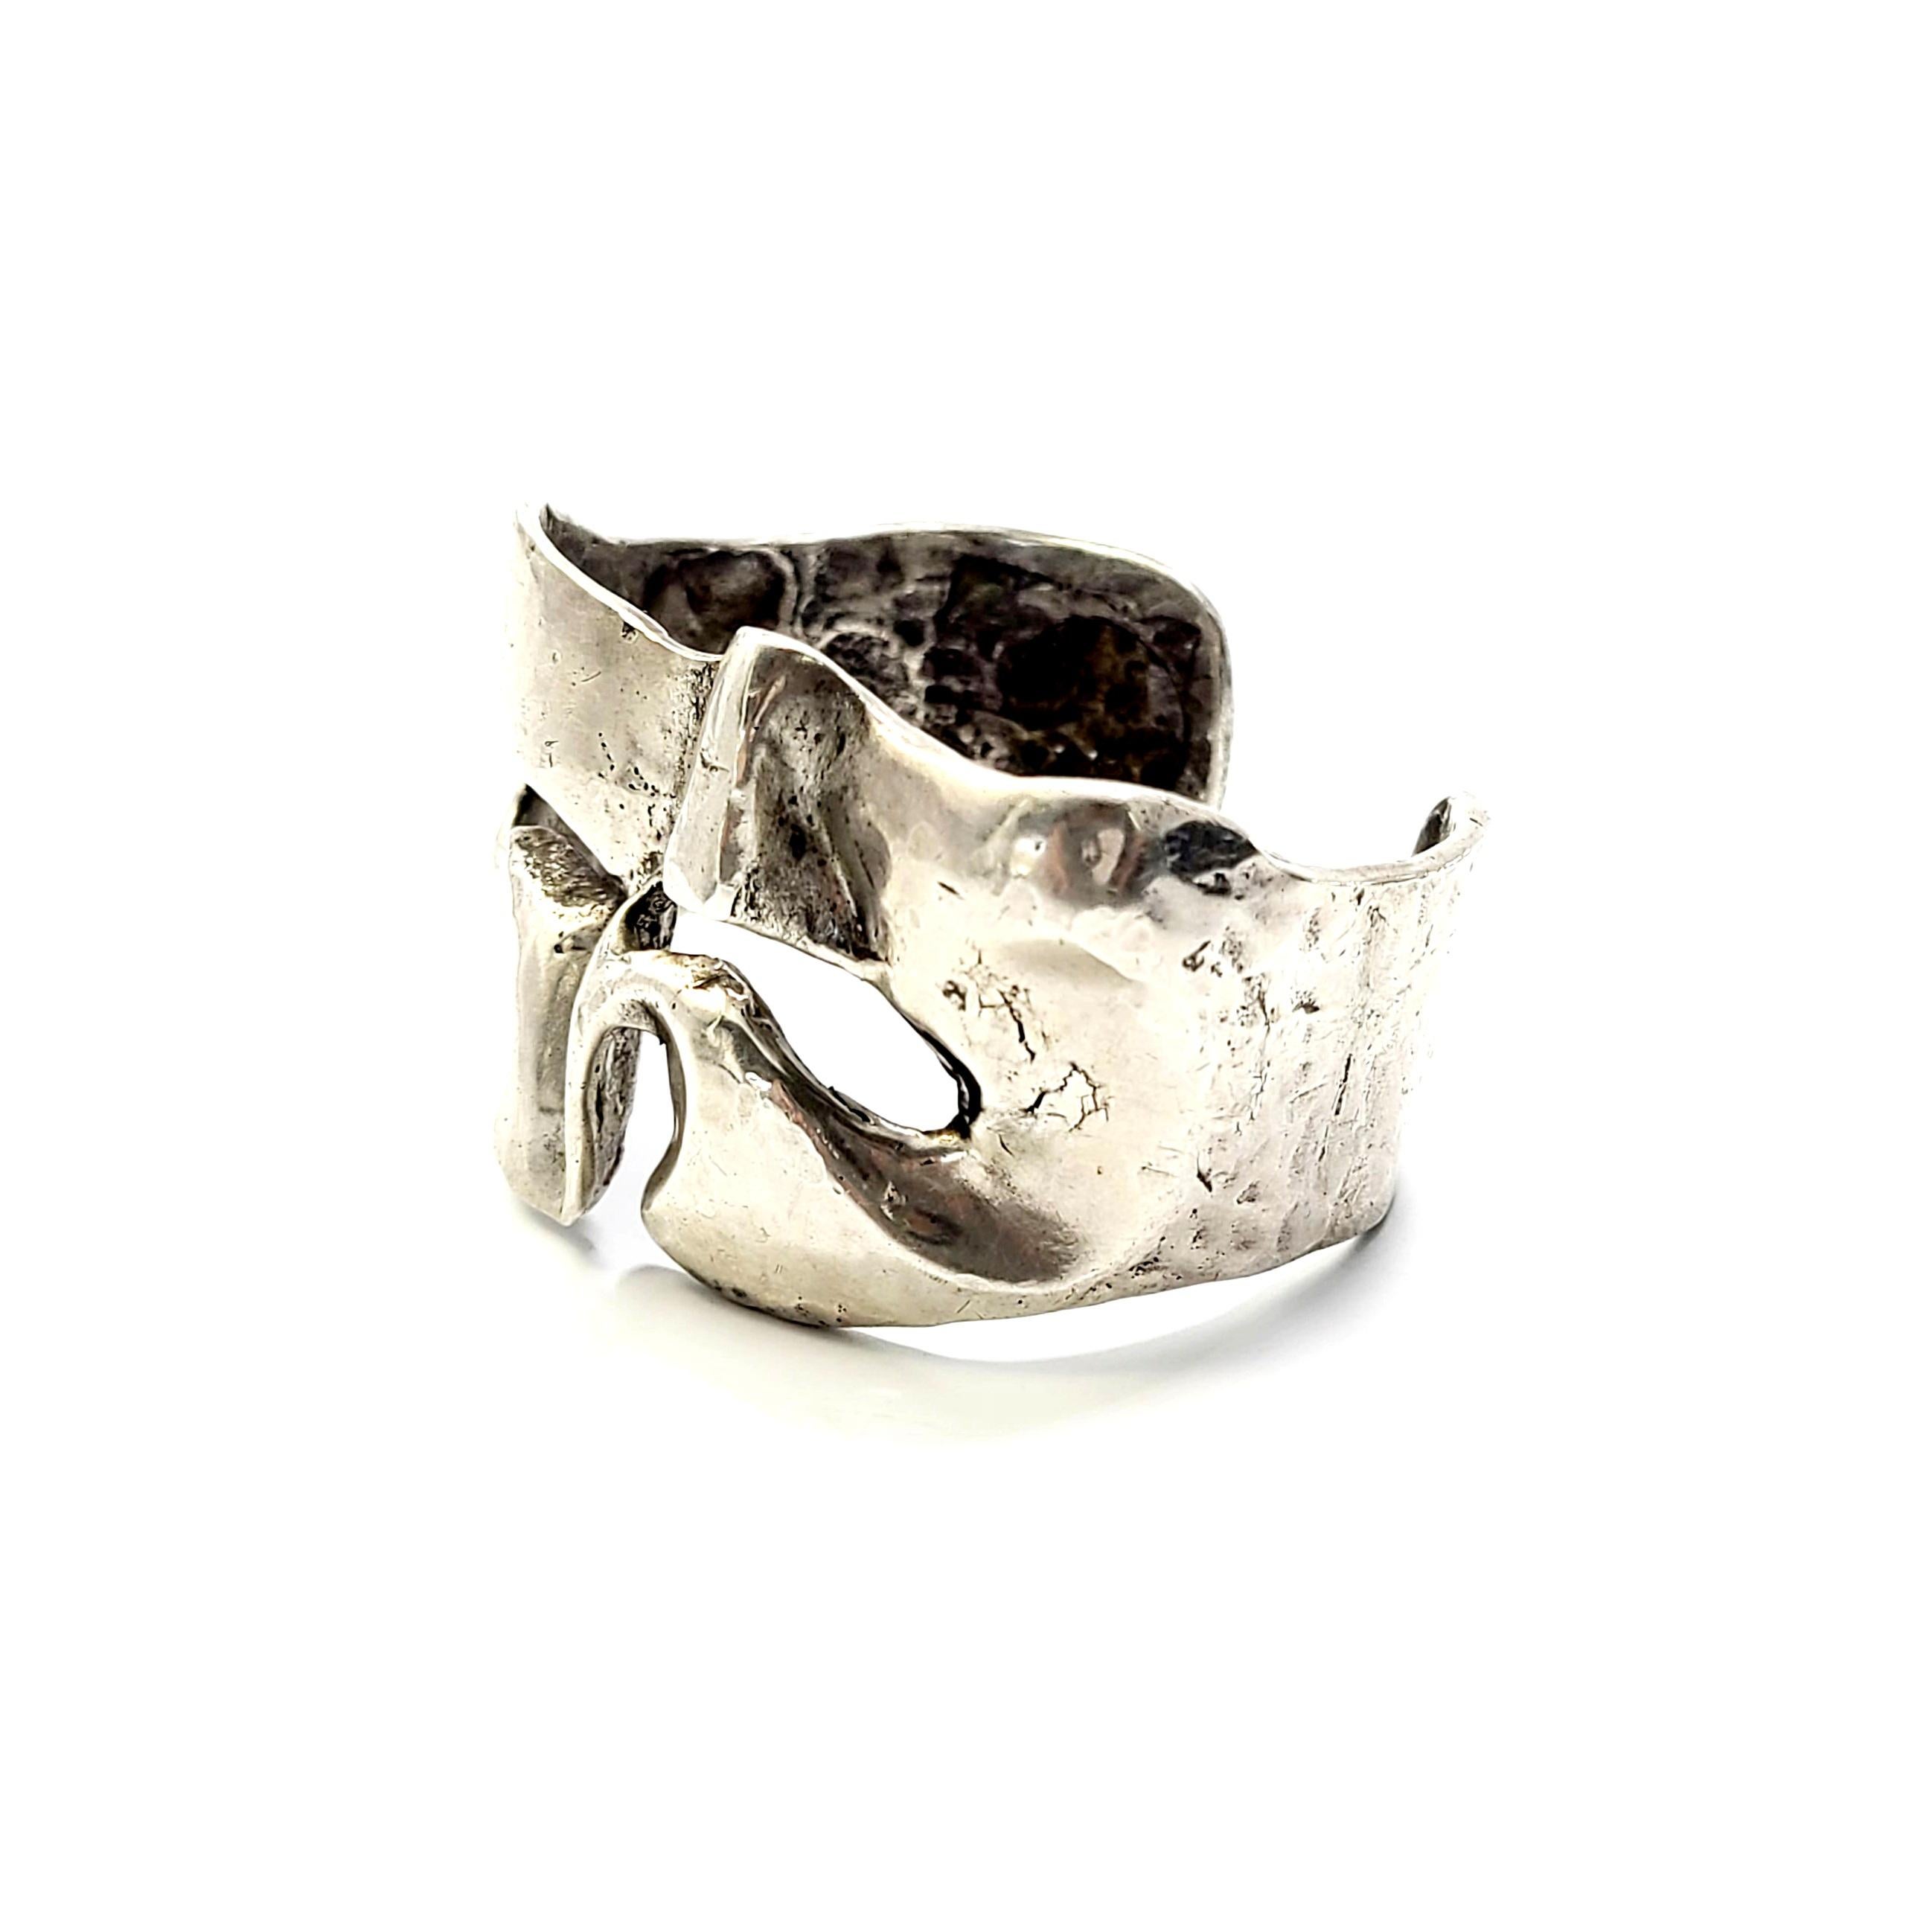 Sterling silver brutalist cuff bracelet, signed JAD.

Free form design with cut-out details.

Measures approx 5 3/8